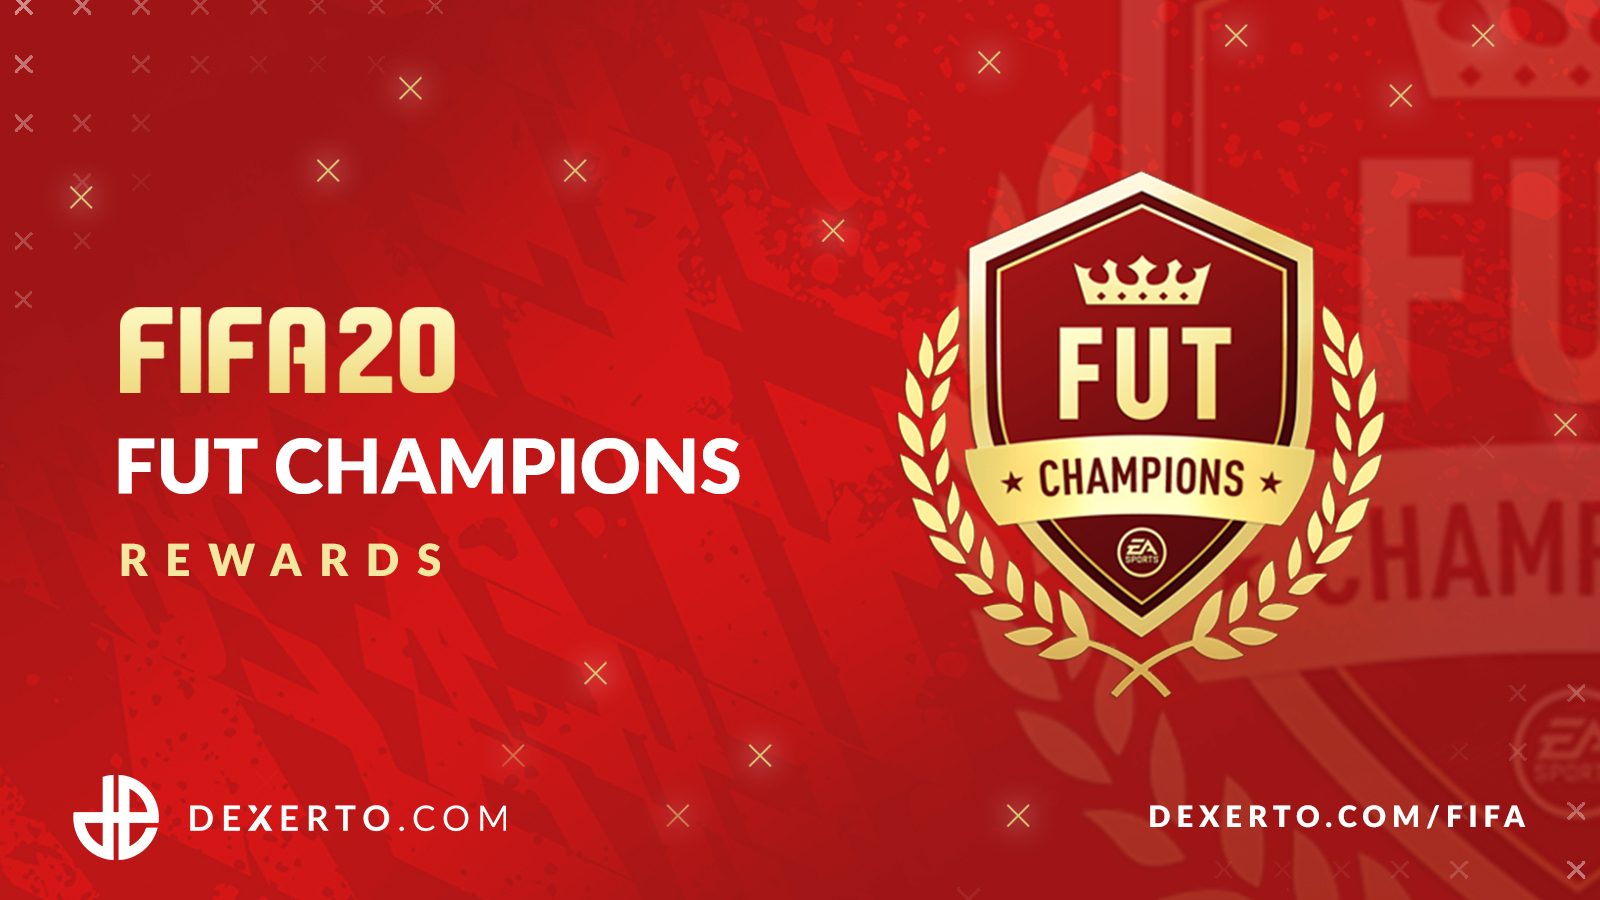 FUT Champions News and Updates for FIFA 18 Ultimate Team